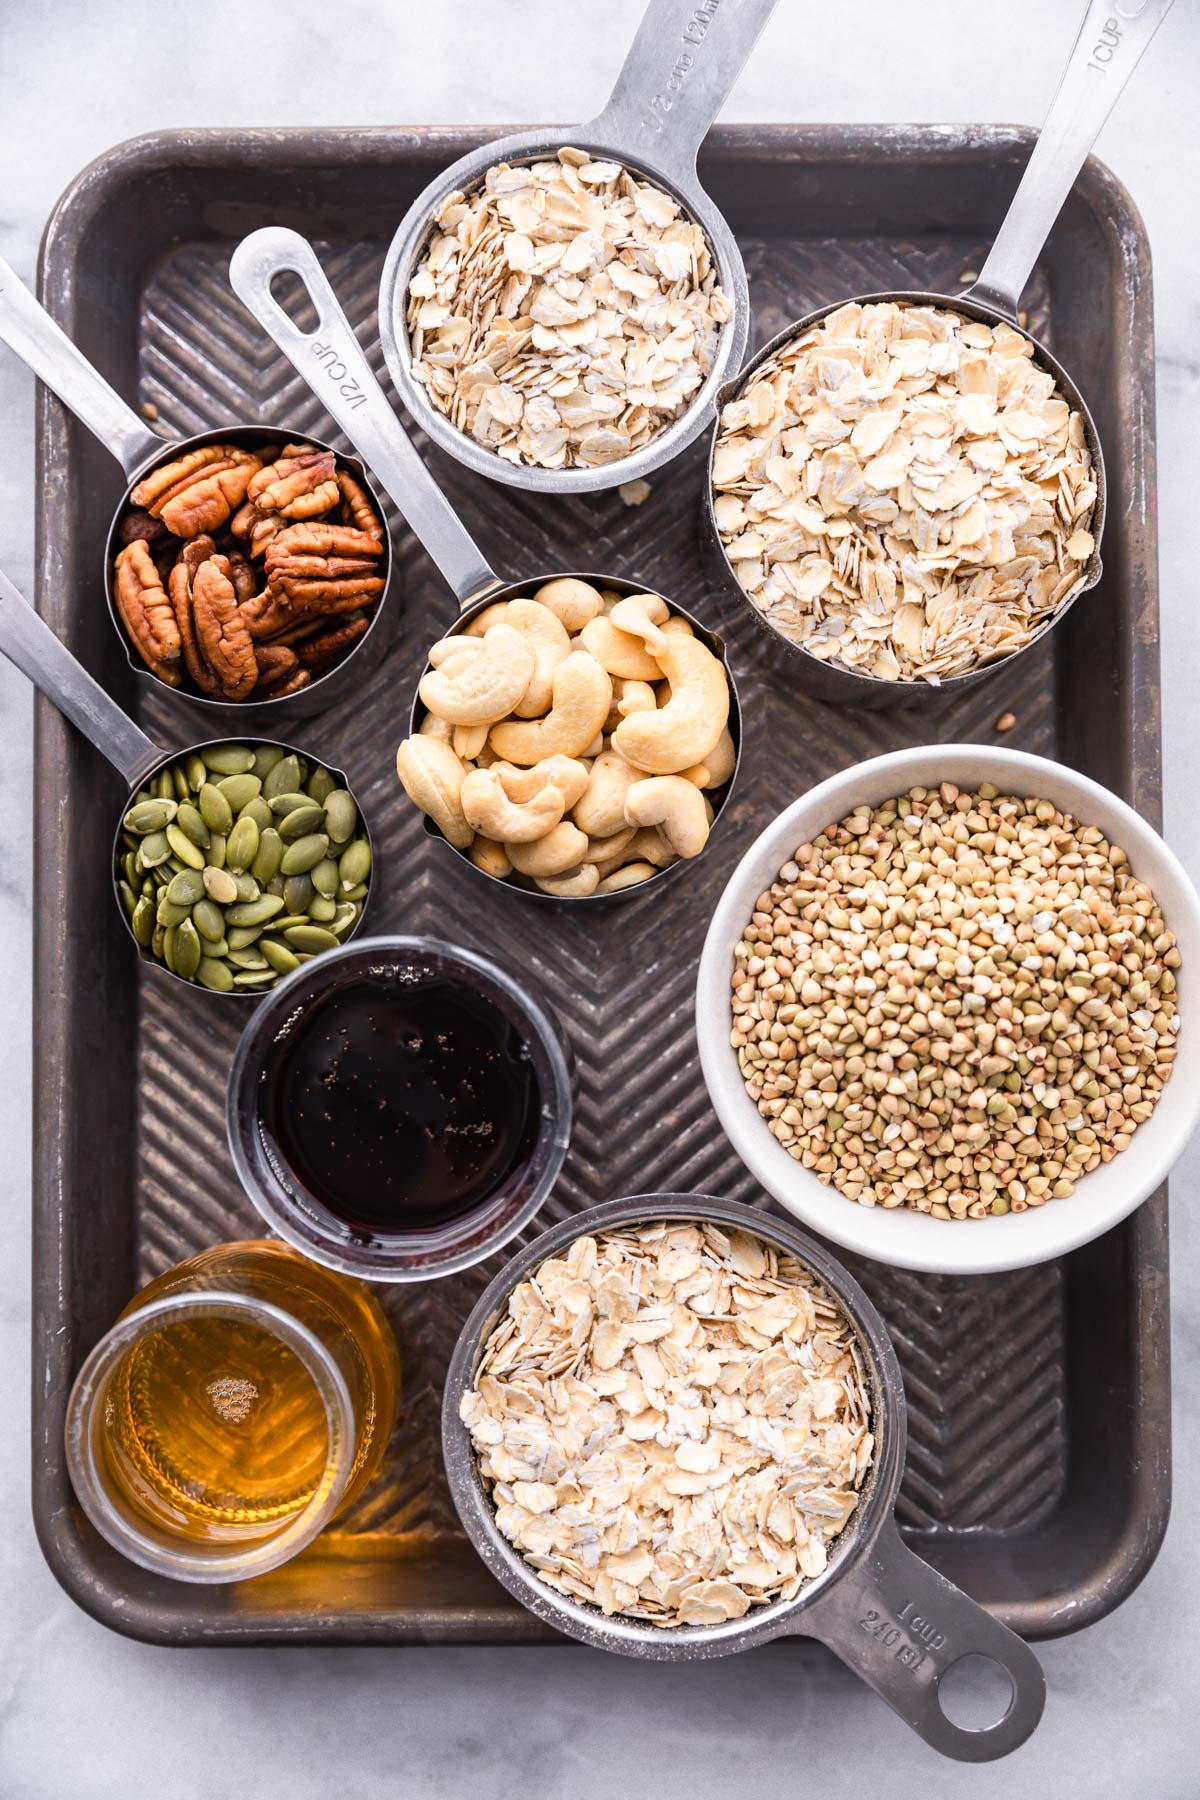 All ingredients for homemade maple buckwheat granola arranged in measuring cups placed on silver baking sheet.